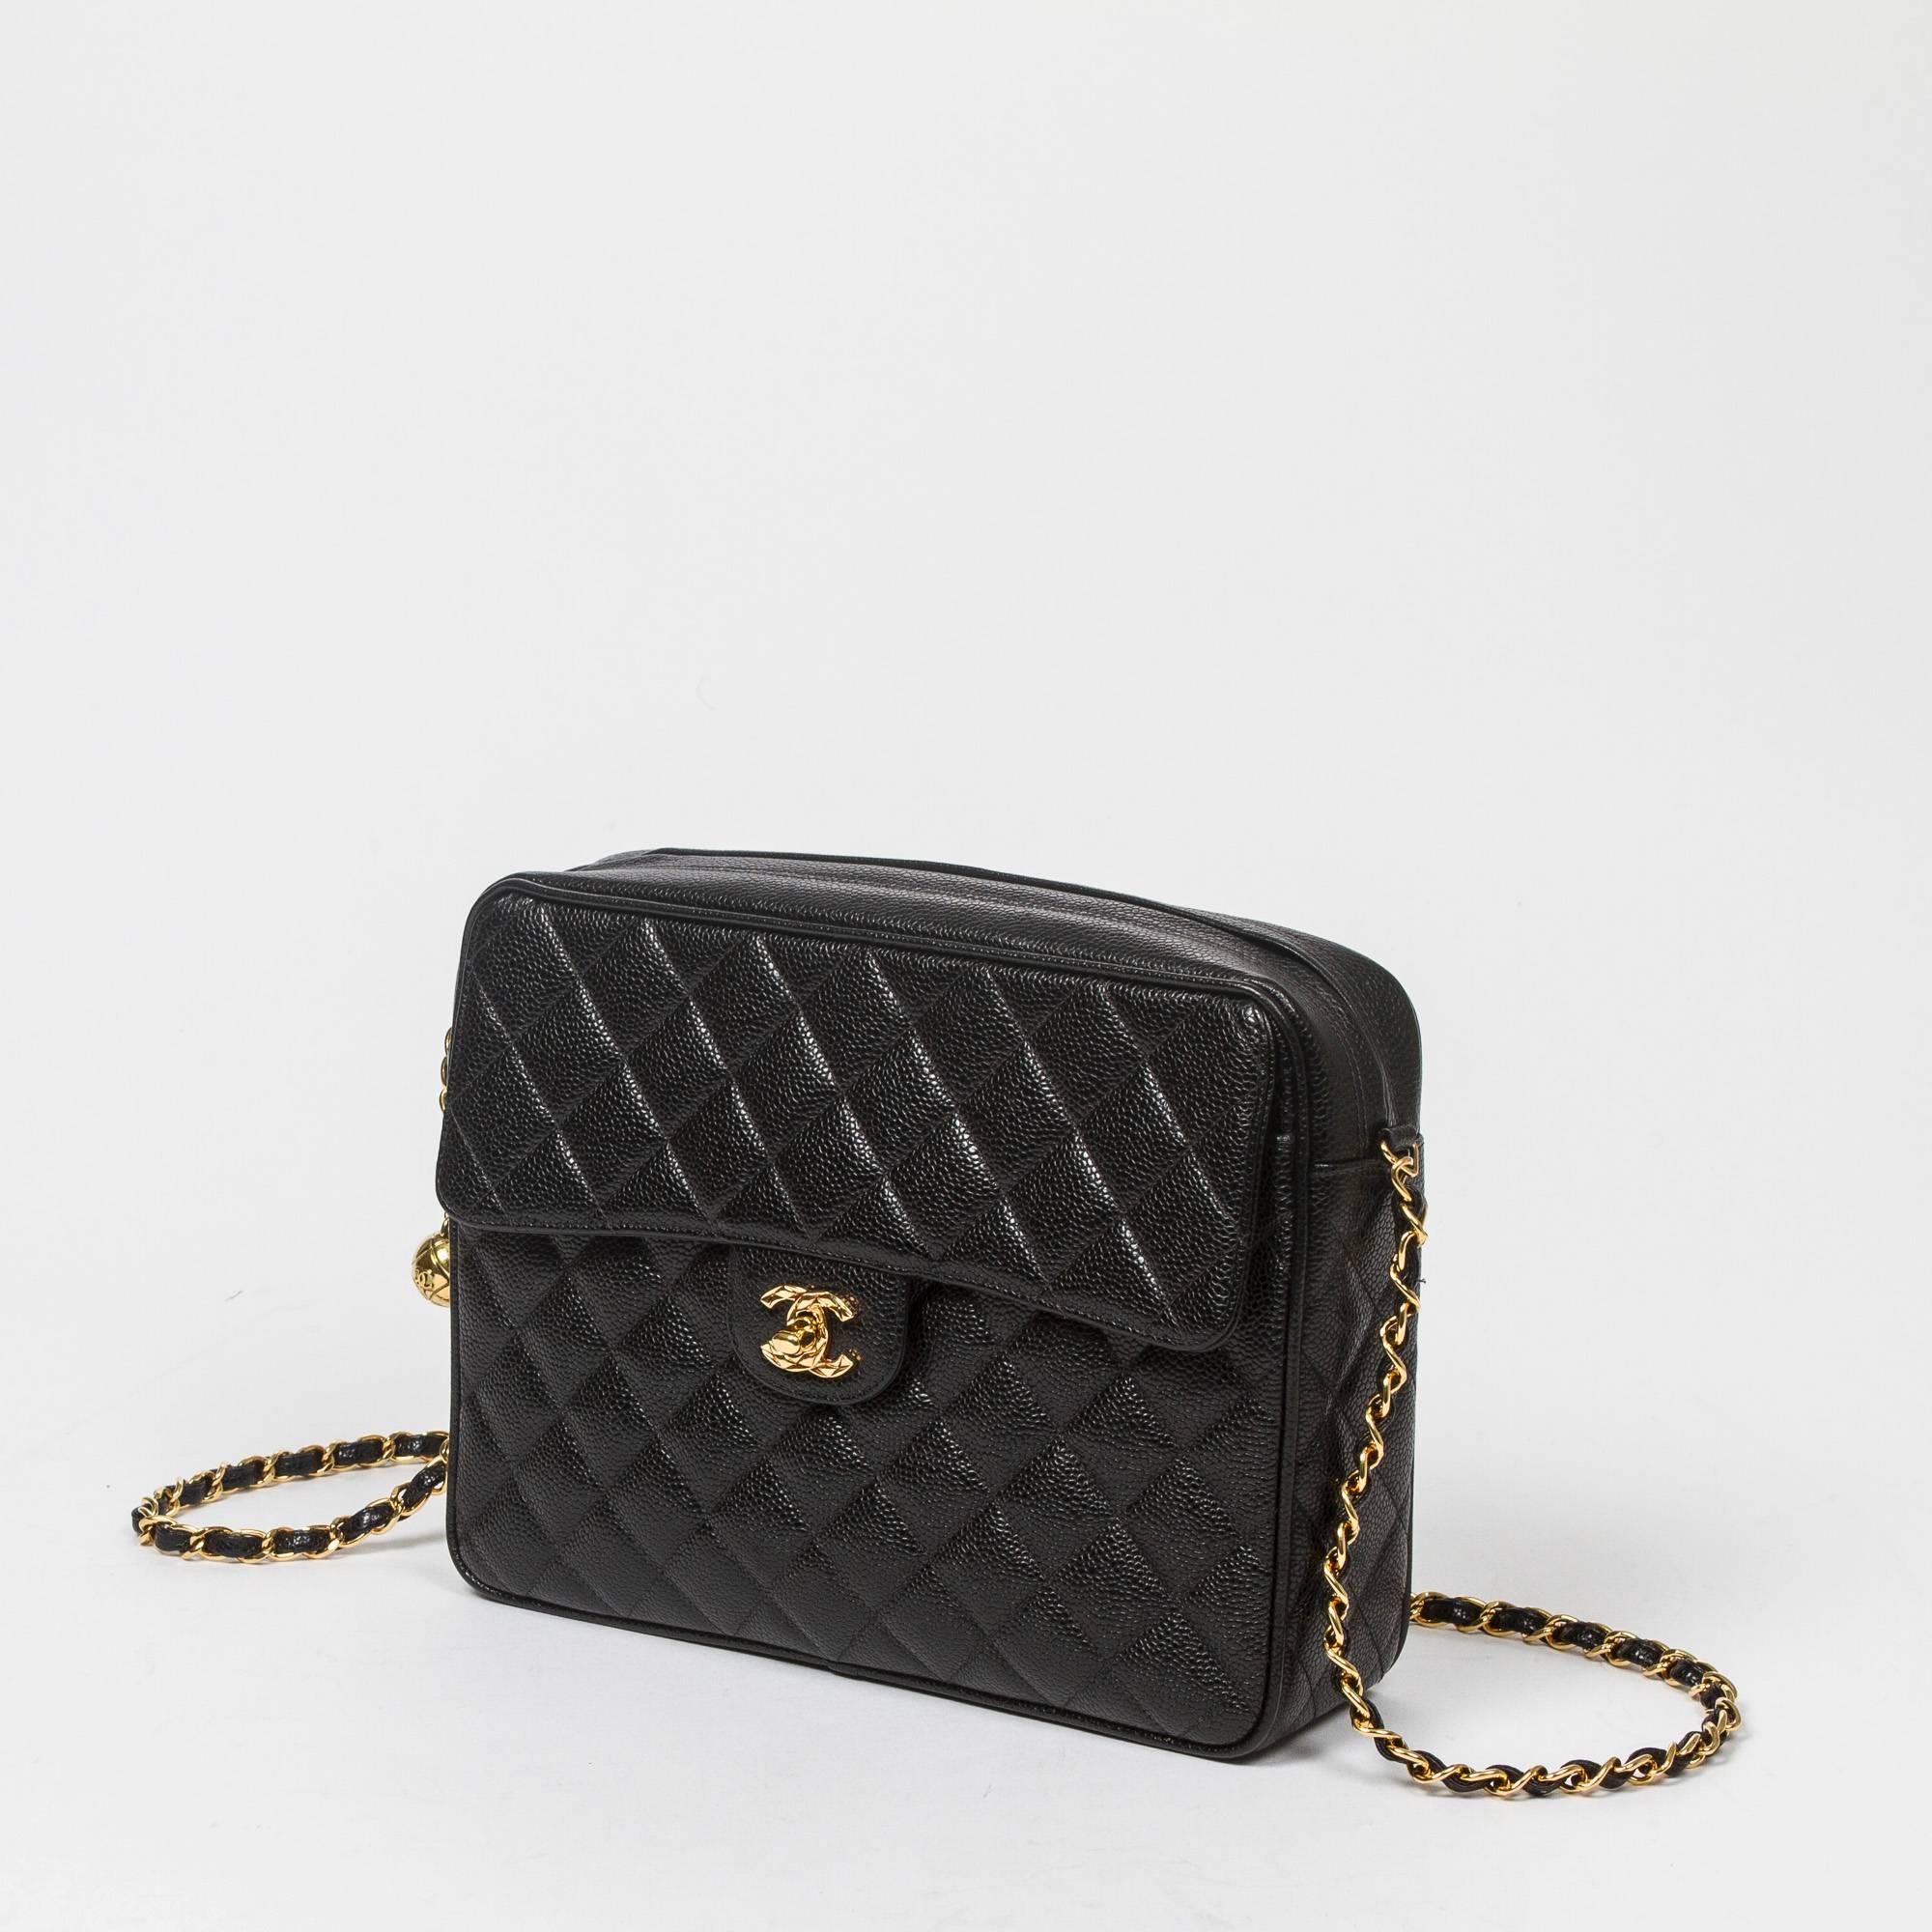 Vintage shoulder bag in black caviar quilted leather, one large front pocket with gold tone signature turnlock. Top zipper closure with gold tone sphere zipper toggle. Black leather lined interior with one zip pocket and one slip pocket. 